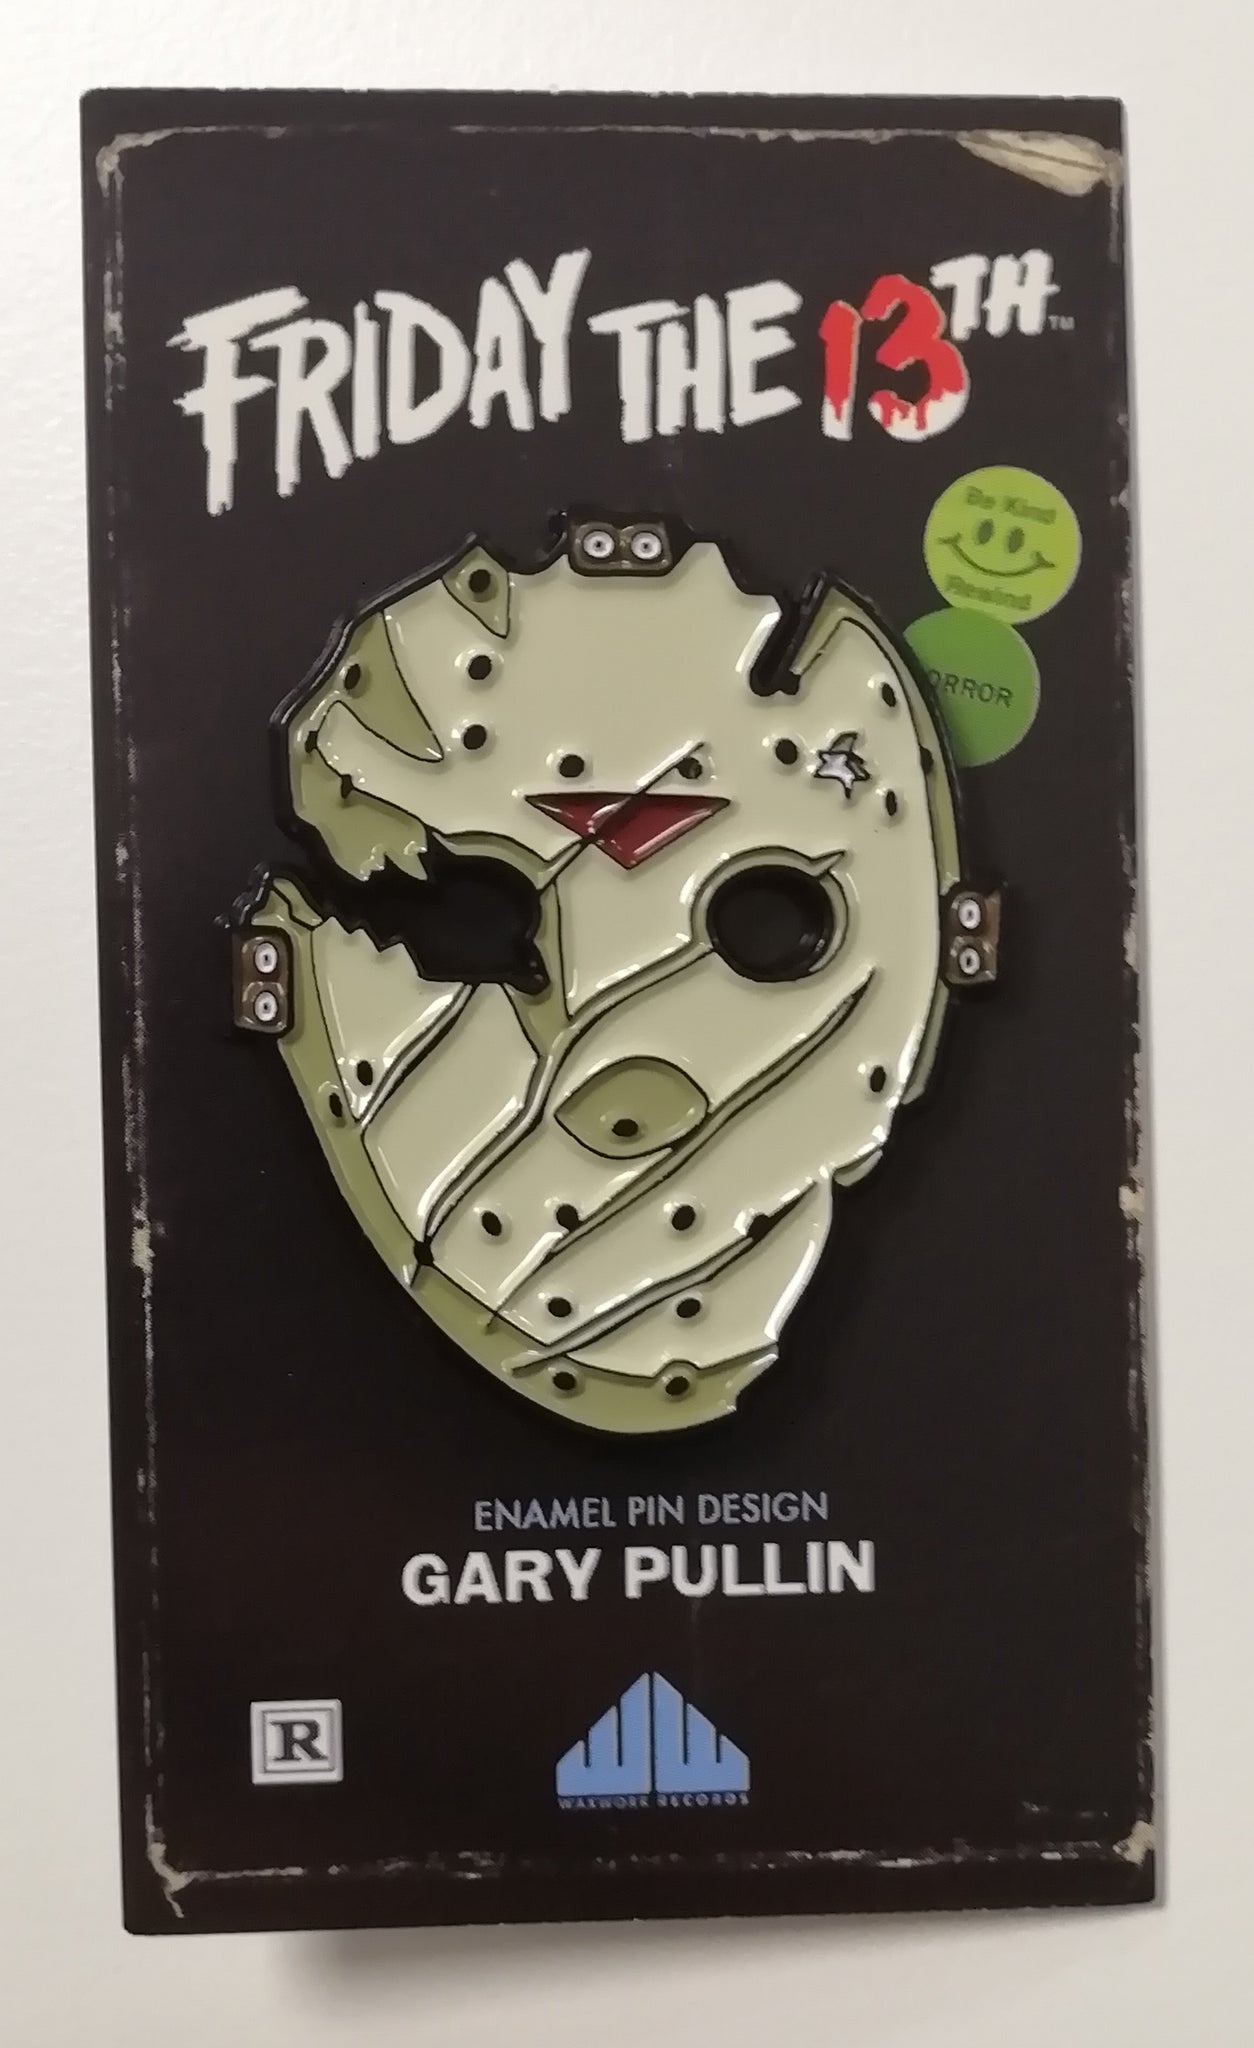 Friday the 13th - Jason Goes to Hell Enamel Pin Design